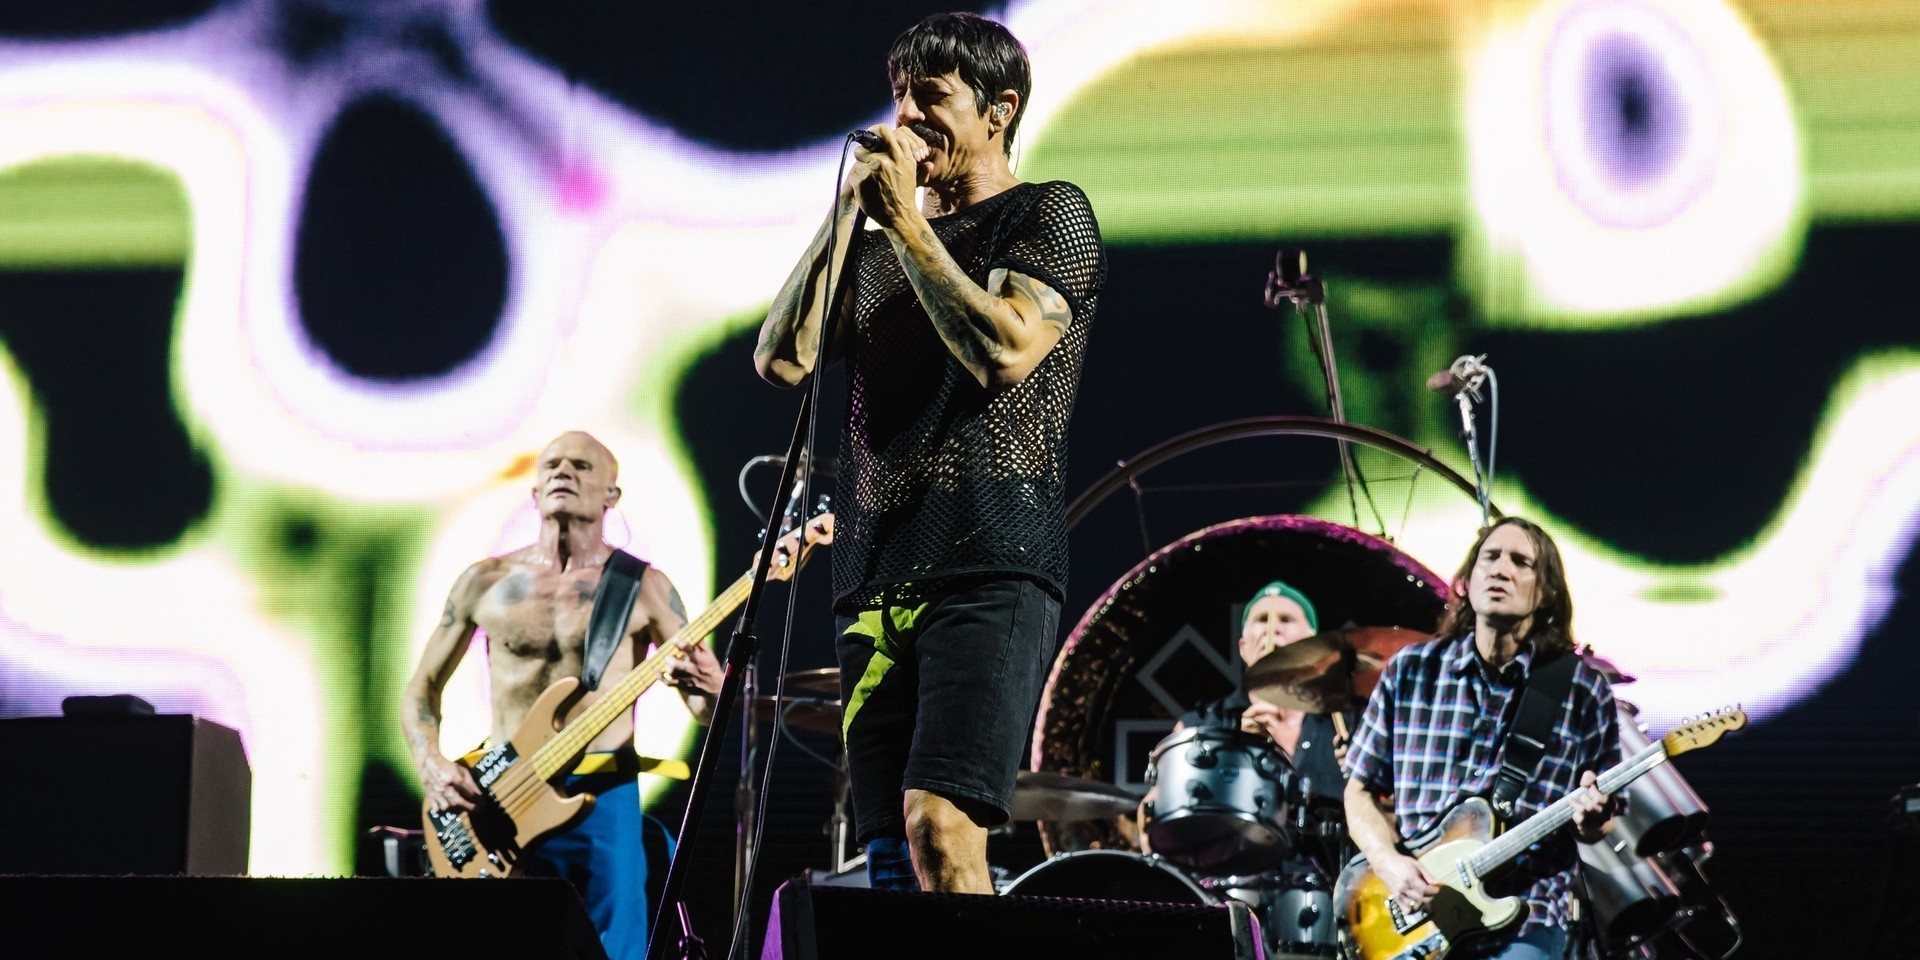 Red Hot Chili Peppers make a sizzling return to Singapore — gig report 